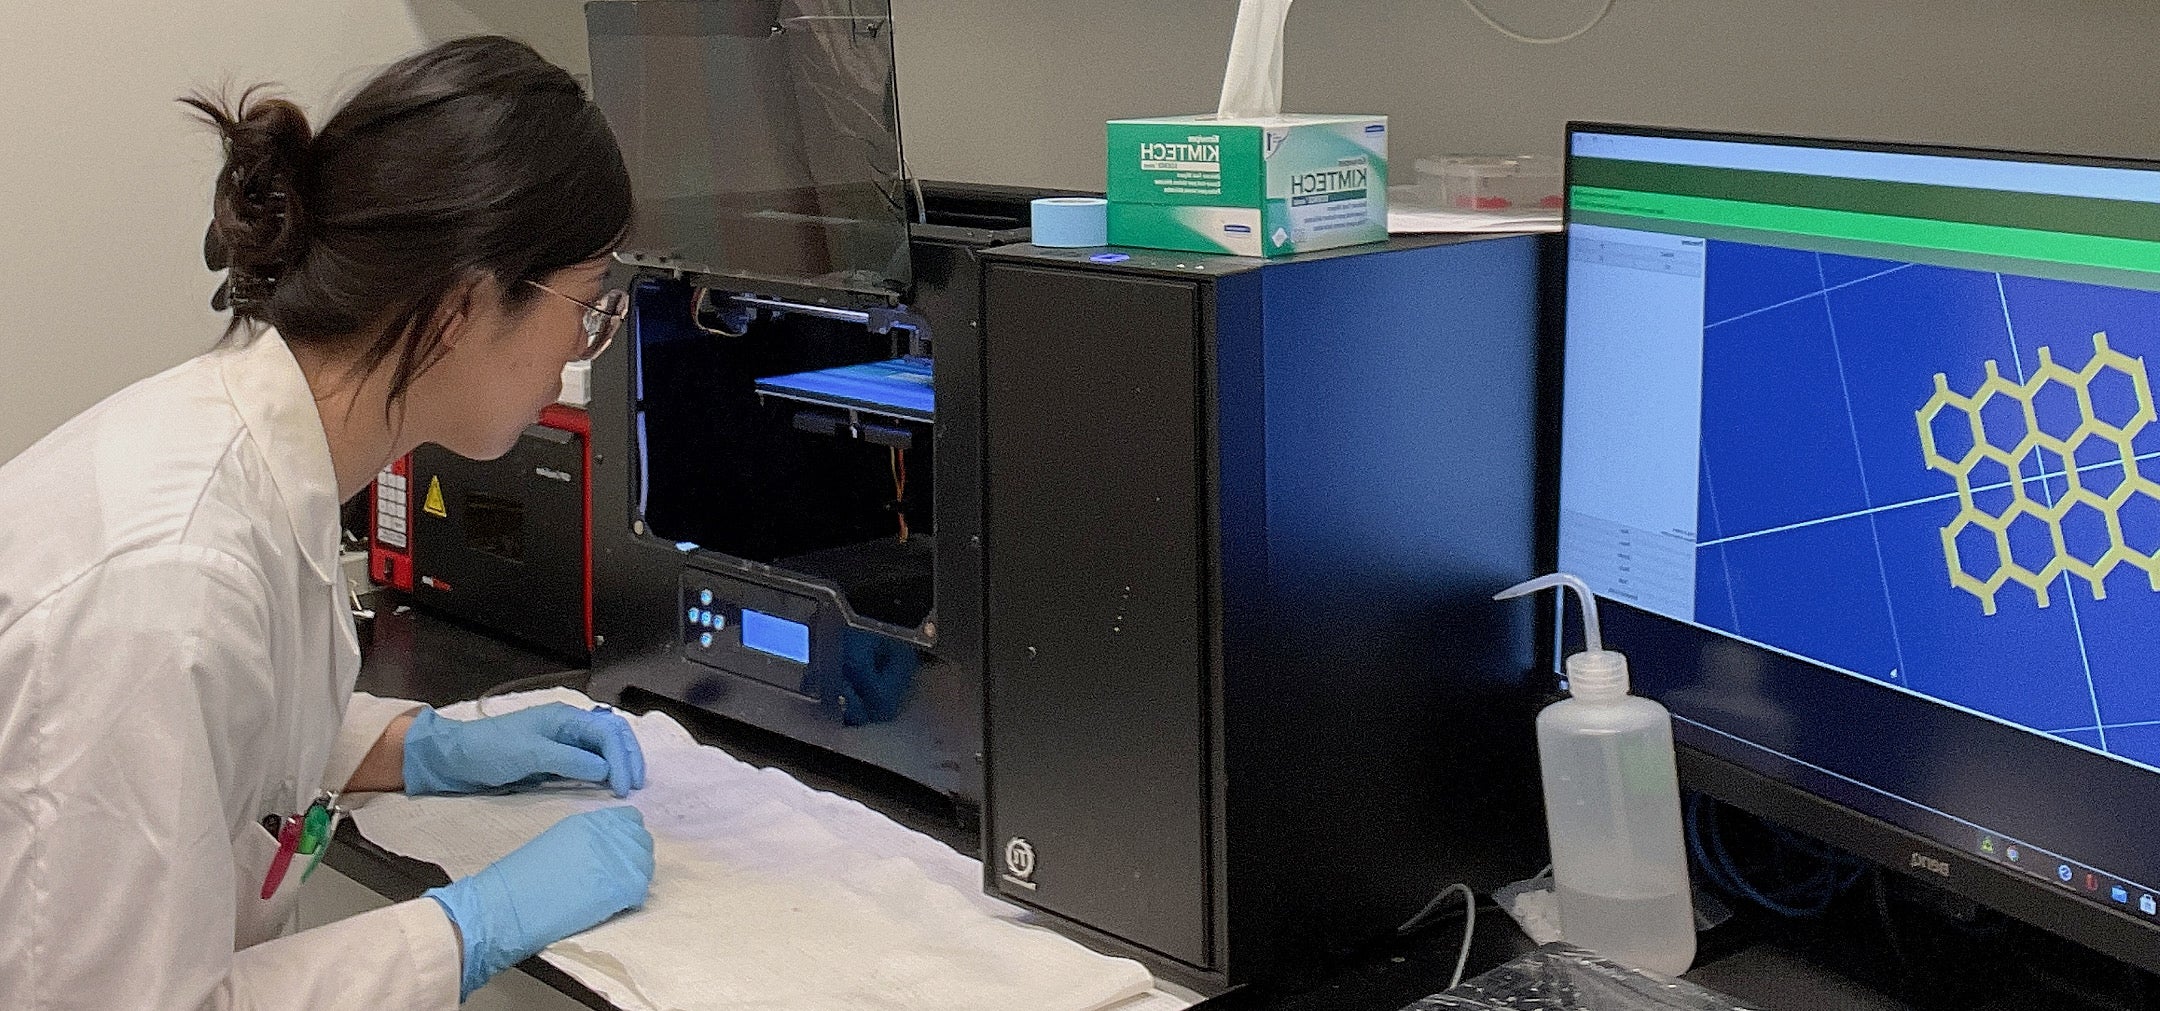 Yun Wu working with a 3D printer in the lab.